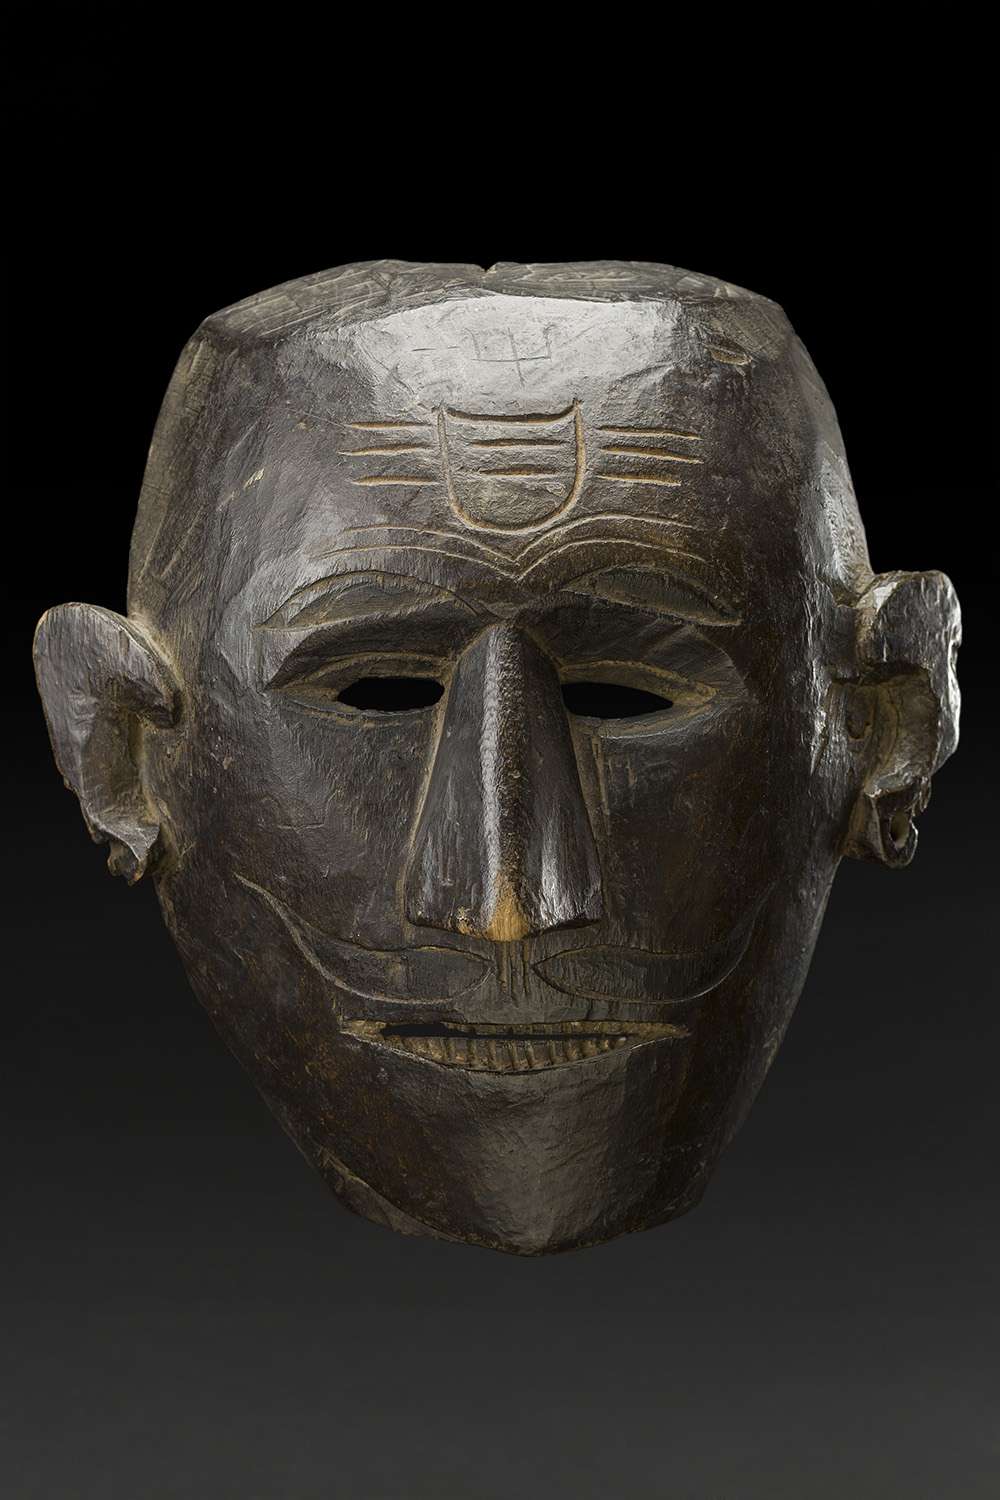   Masks    Nepal  , Early 20th C. Wood 11.5 x 10.4 x 5.5 inches 29.2 x 26.4 x 14 cm M 220s 